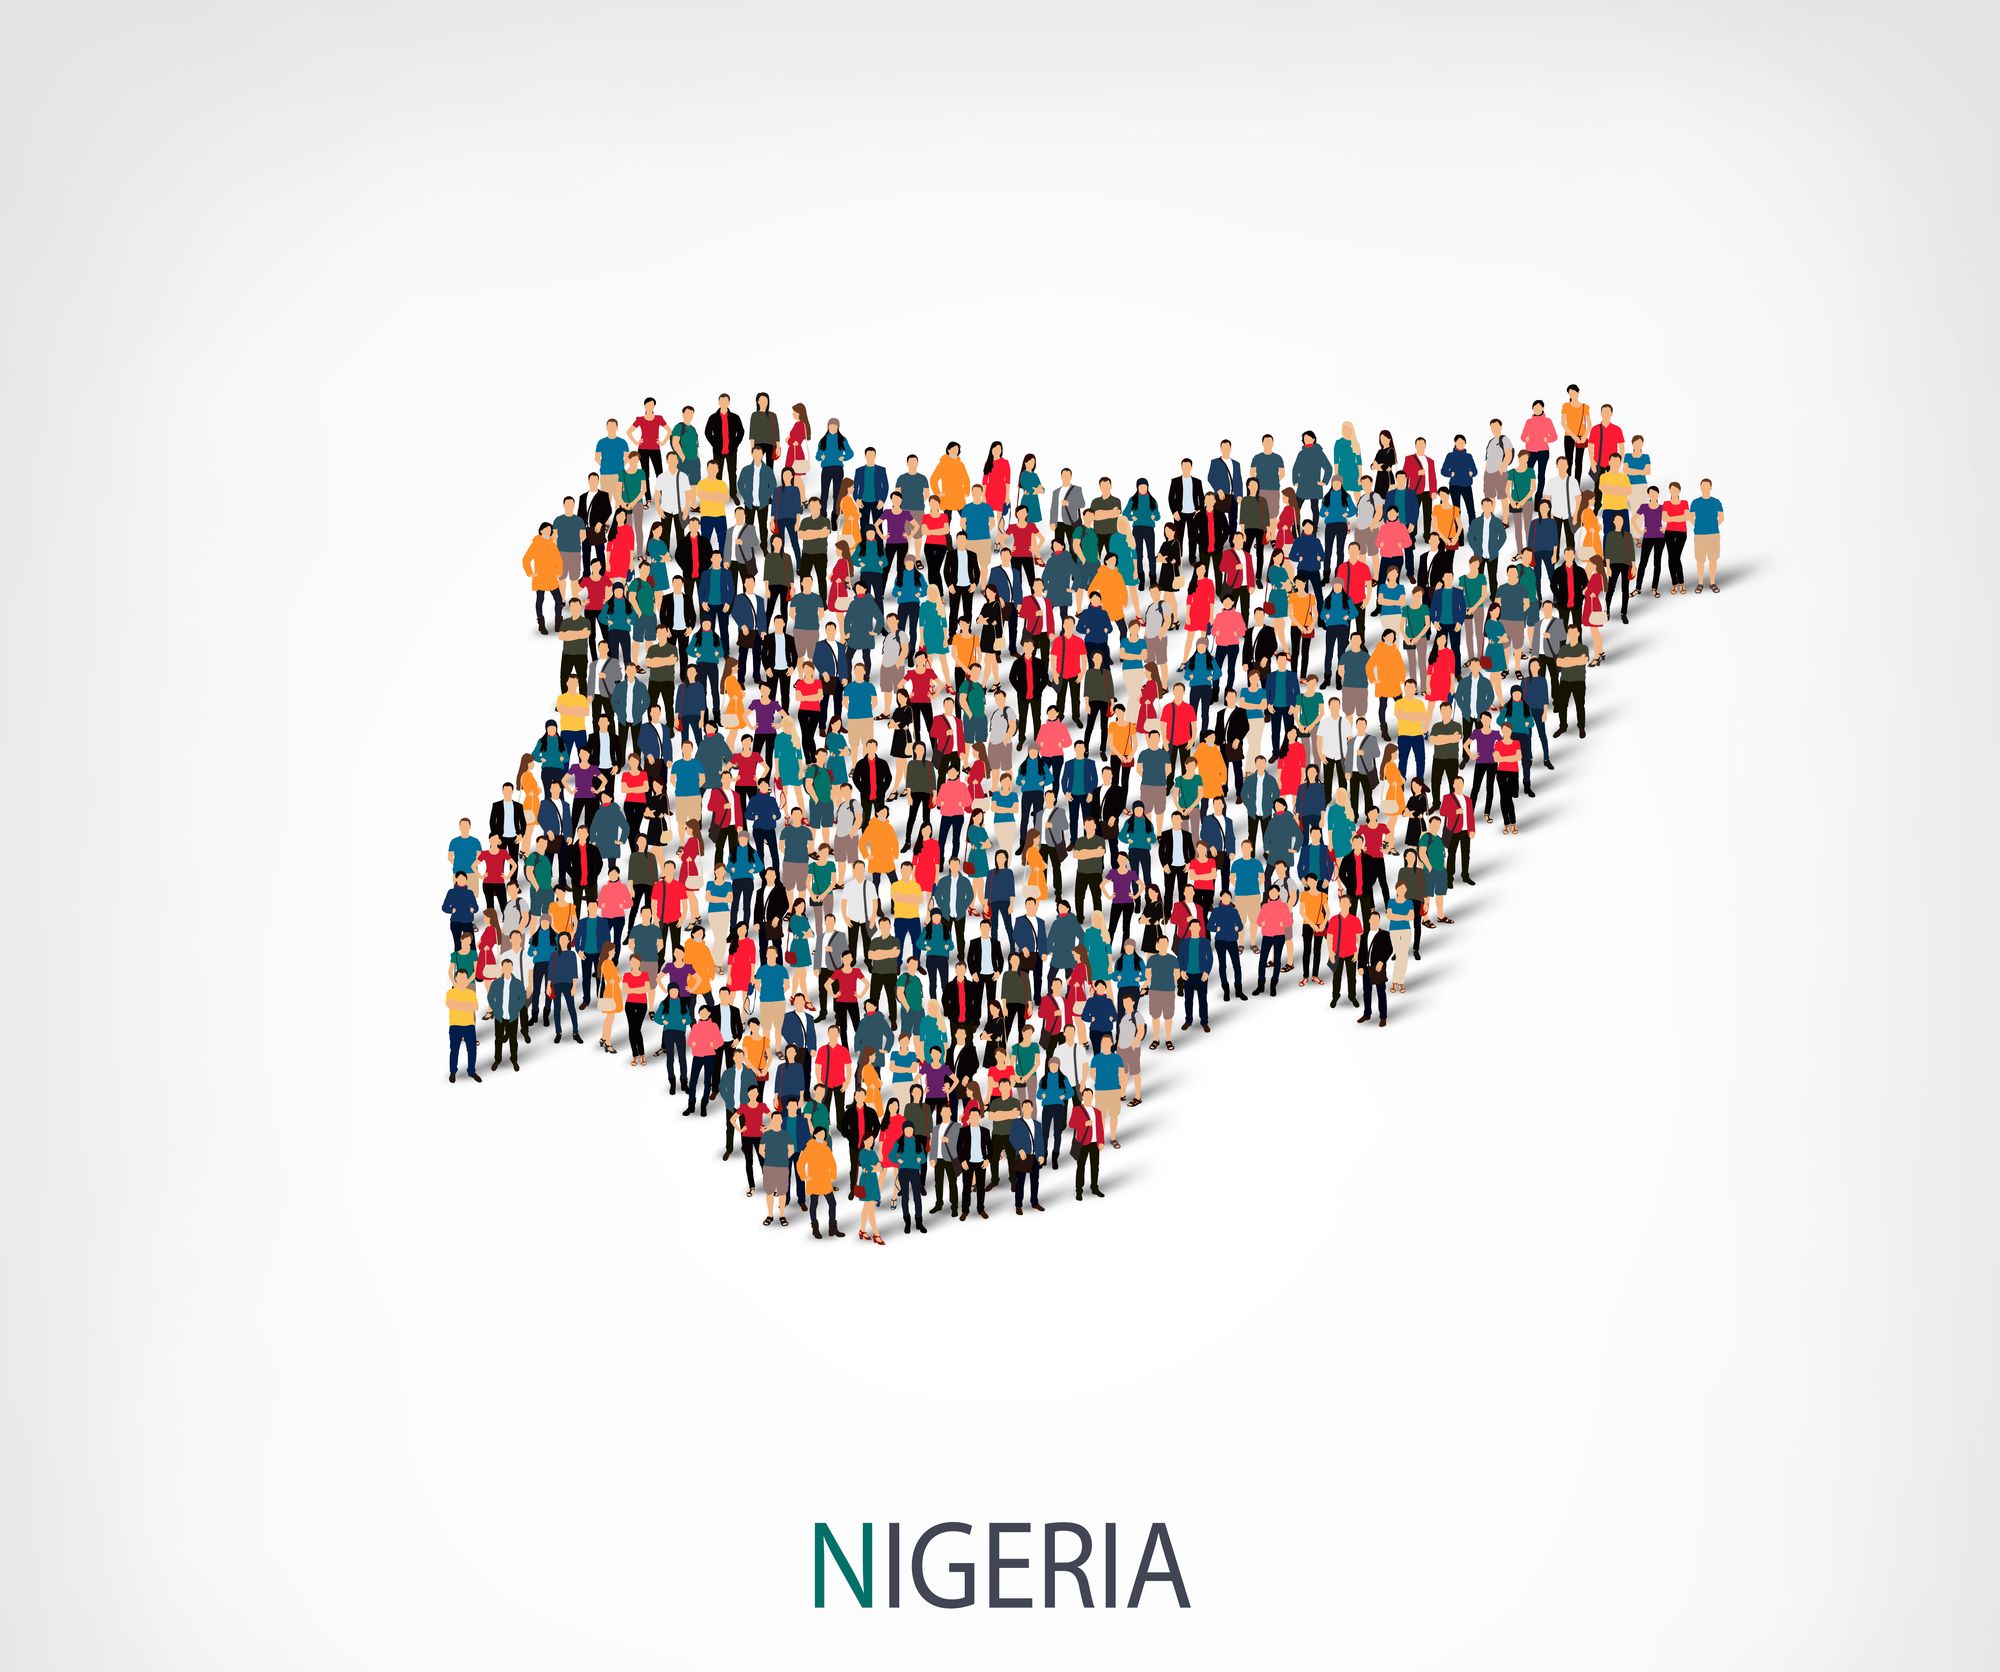 5 Things You Didn't Know About Nigeria